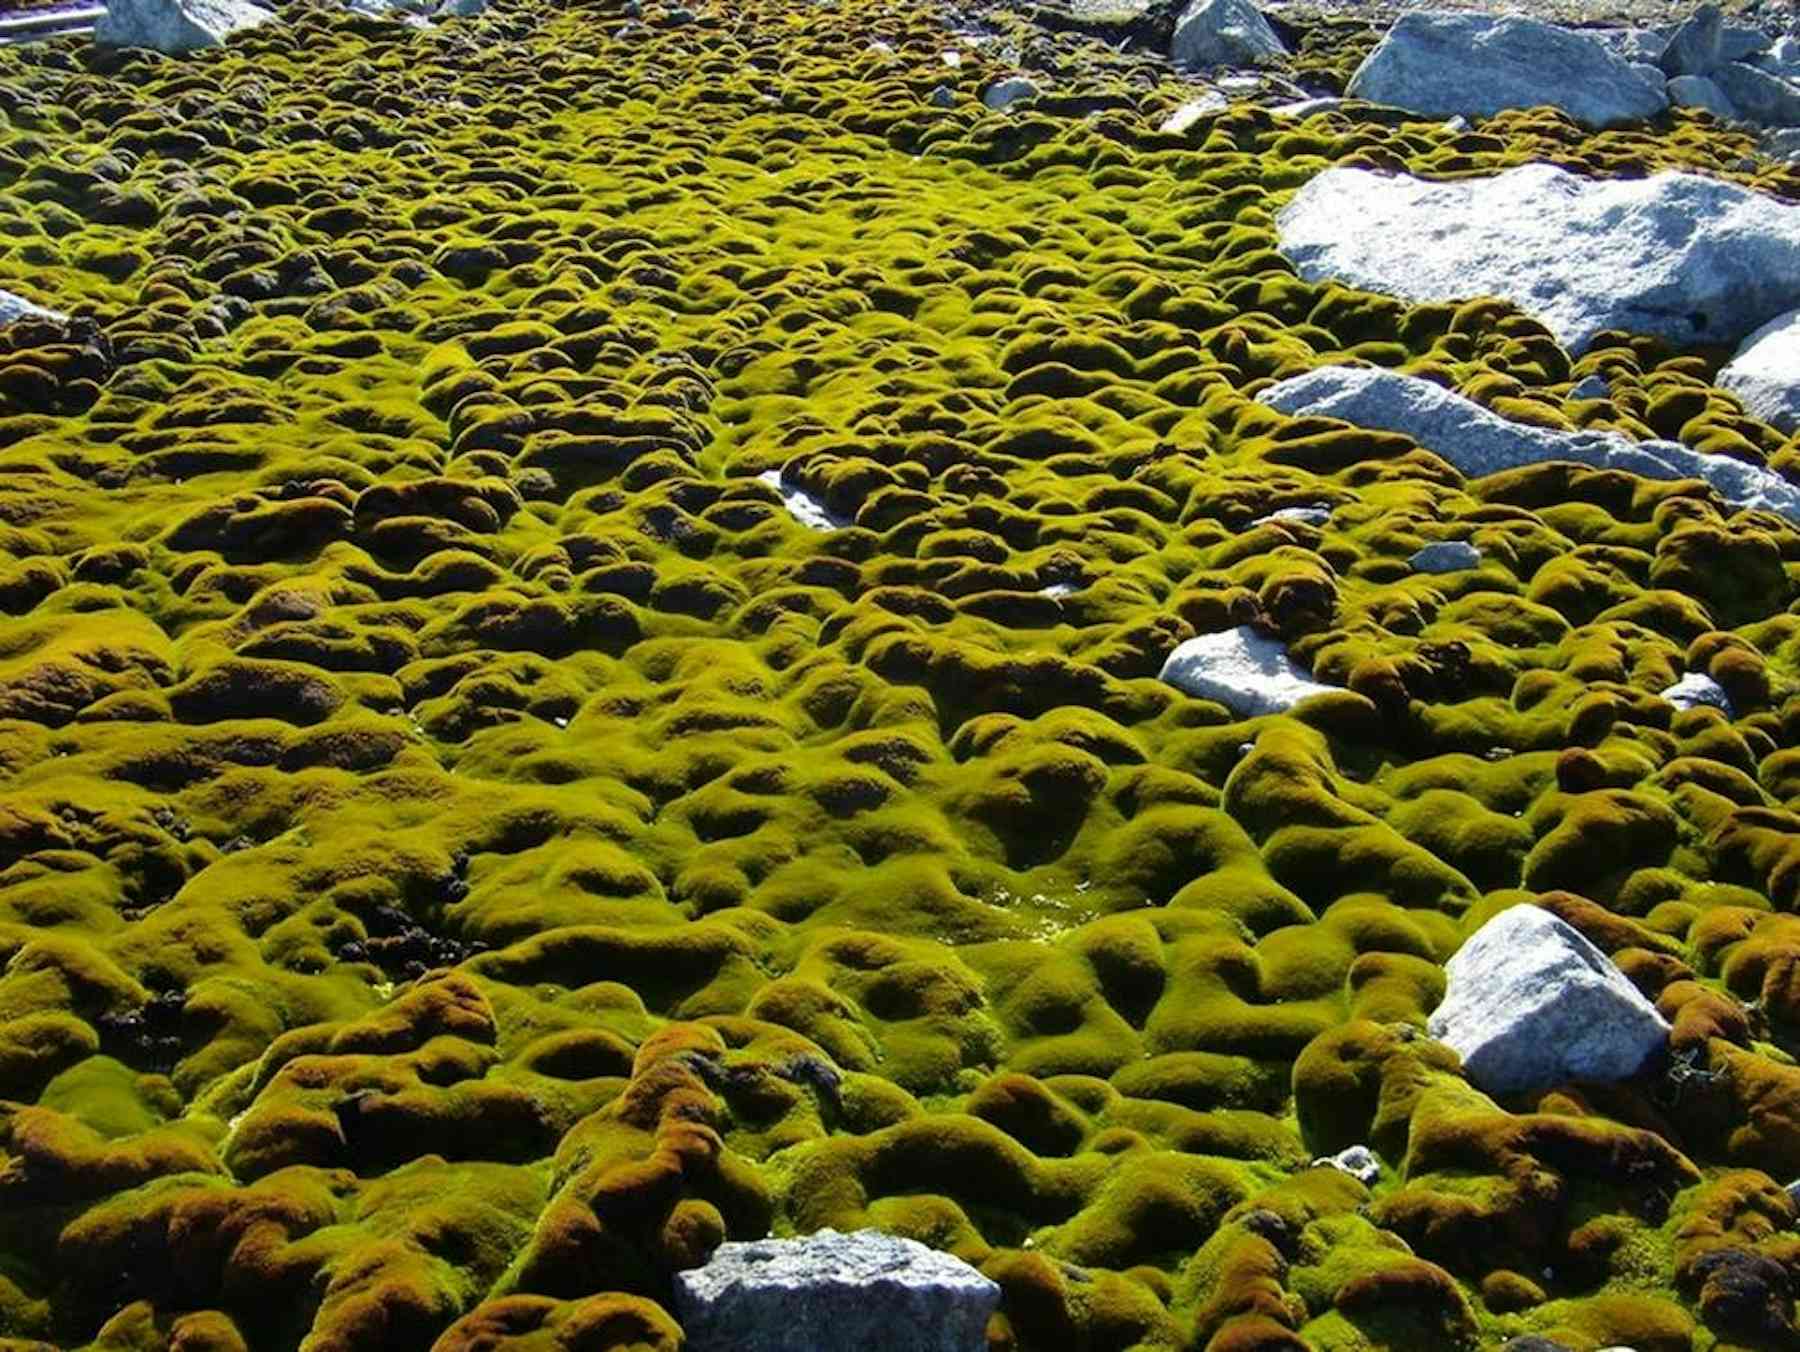 http://theconversation.com/antarcticas-moss-forests-are-drying-and-dying-103751